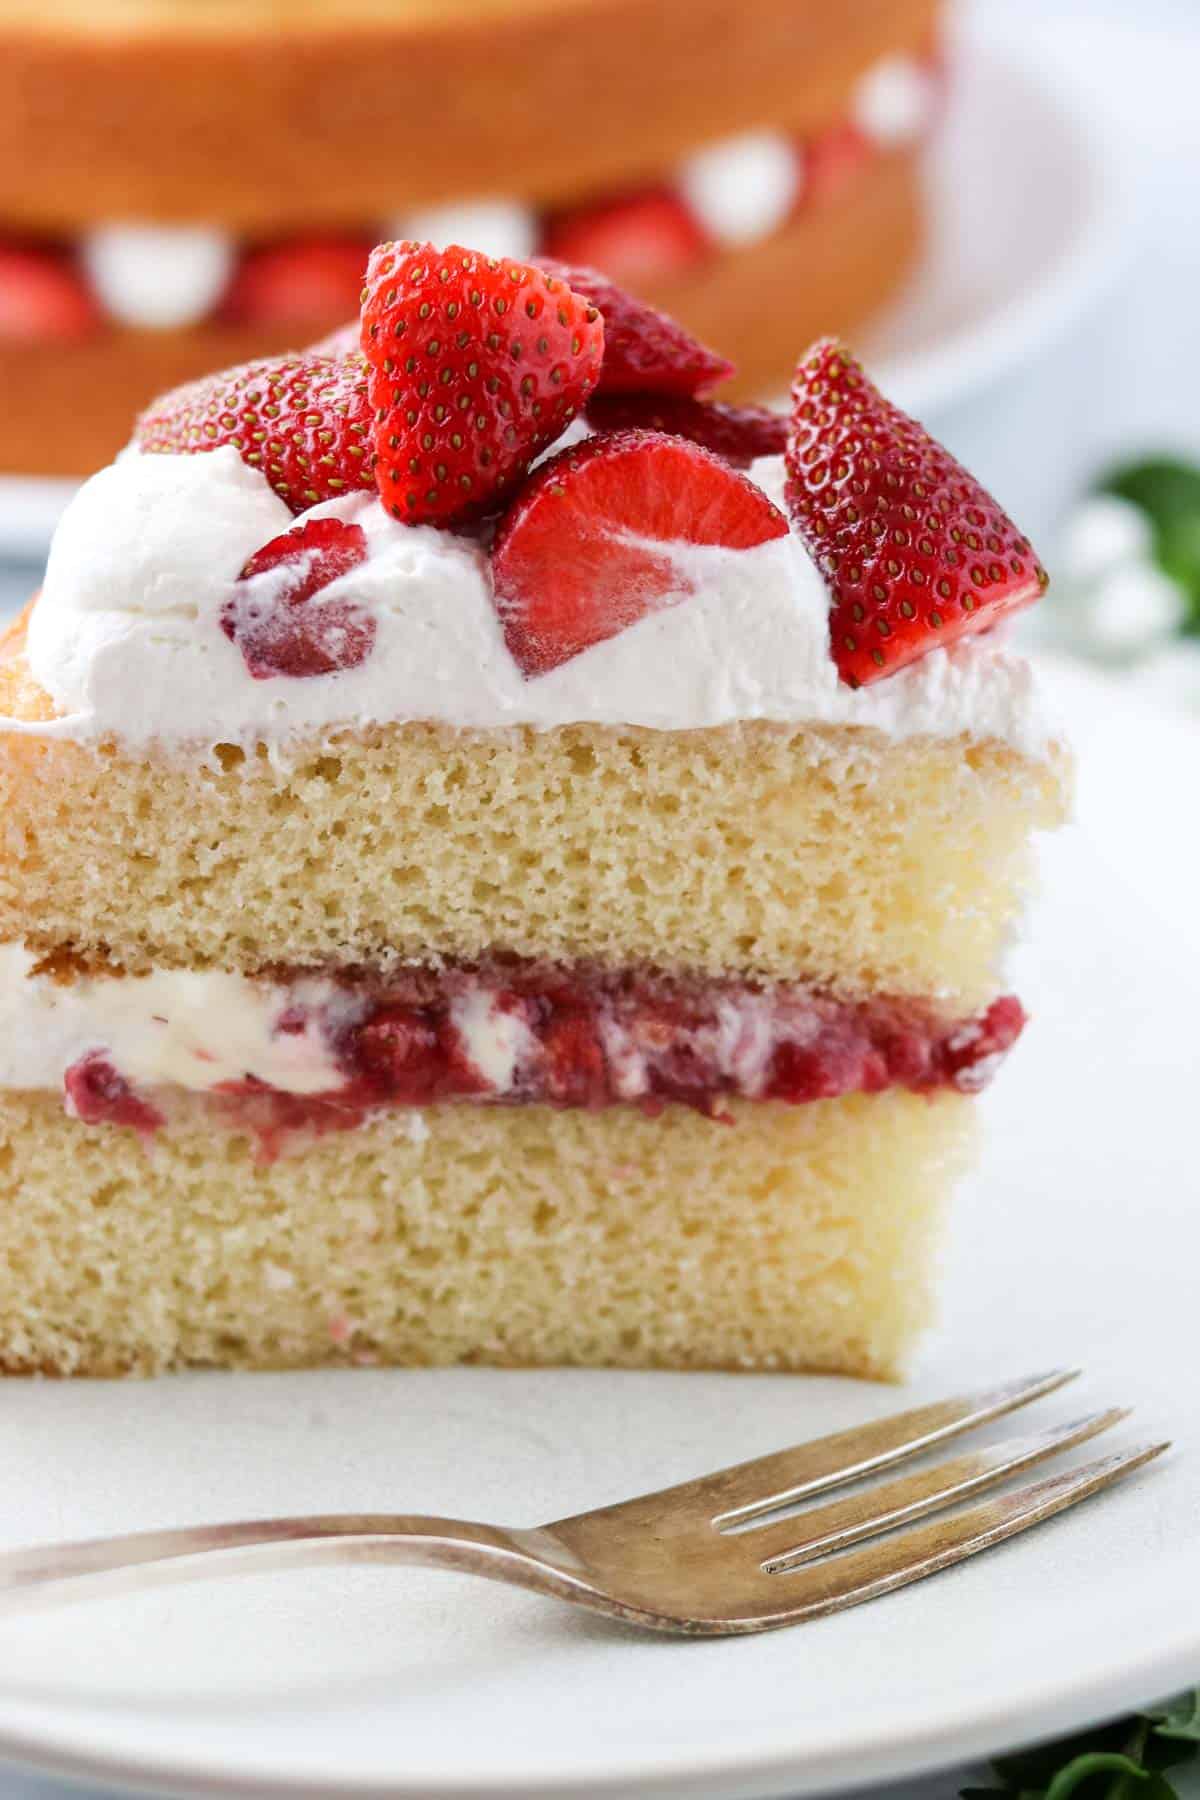 Upright slice of vanilla cake with strawberry filling next to a fork.